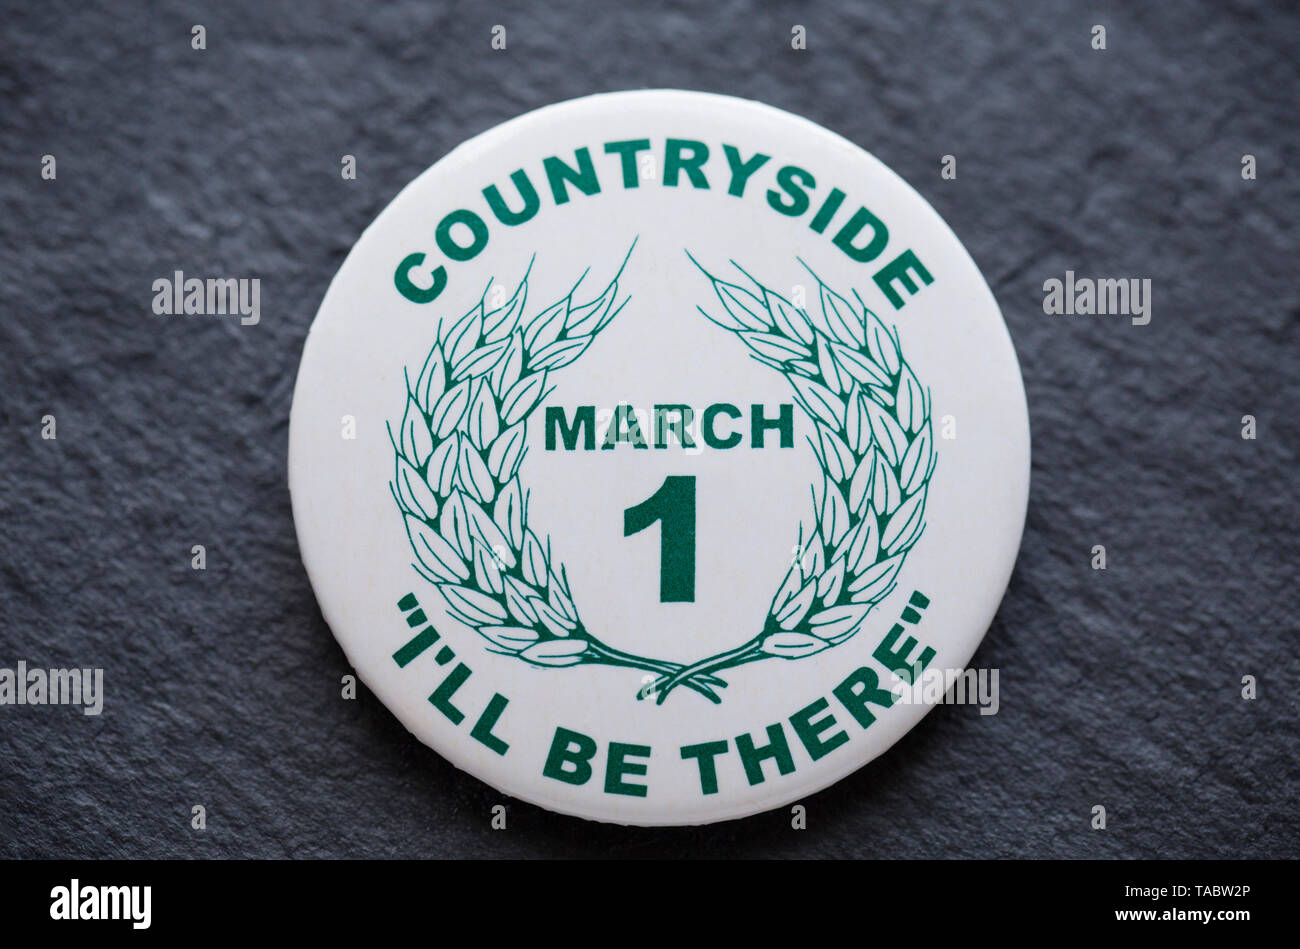 A pro-hunting badge that was made for the Countryside March of 1998 in relation to the proposal to ban hunting with dogs in the UK. The march in Londo Stock Photo